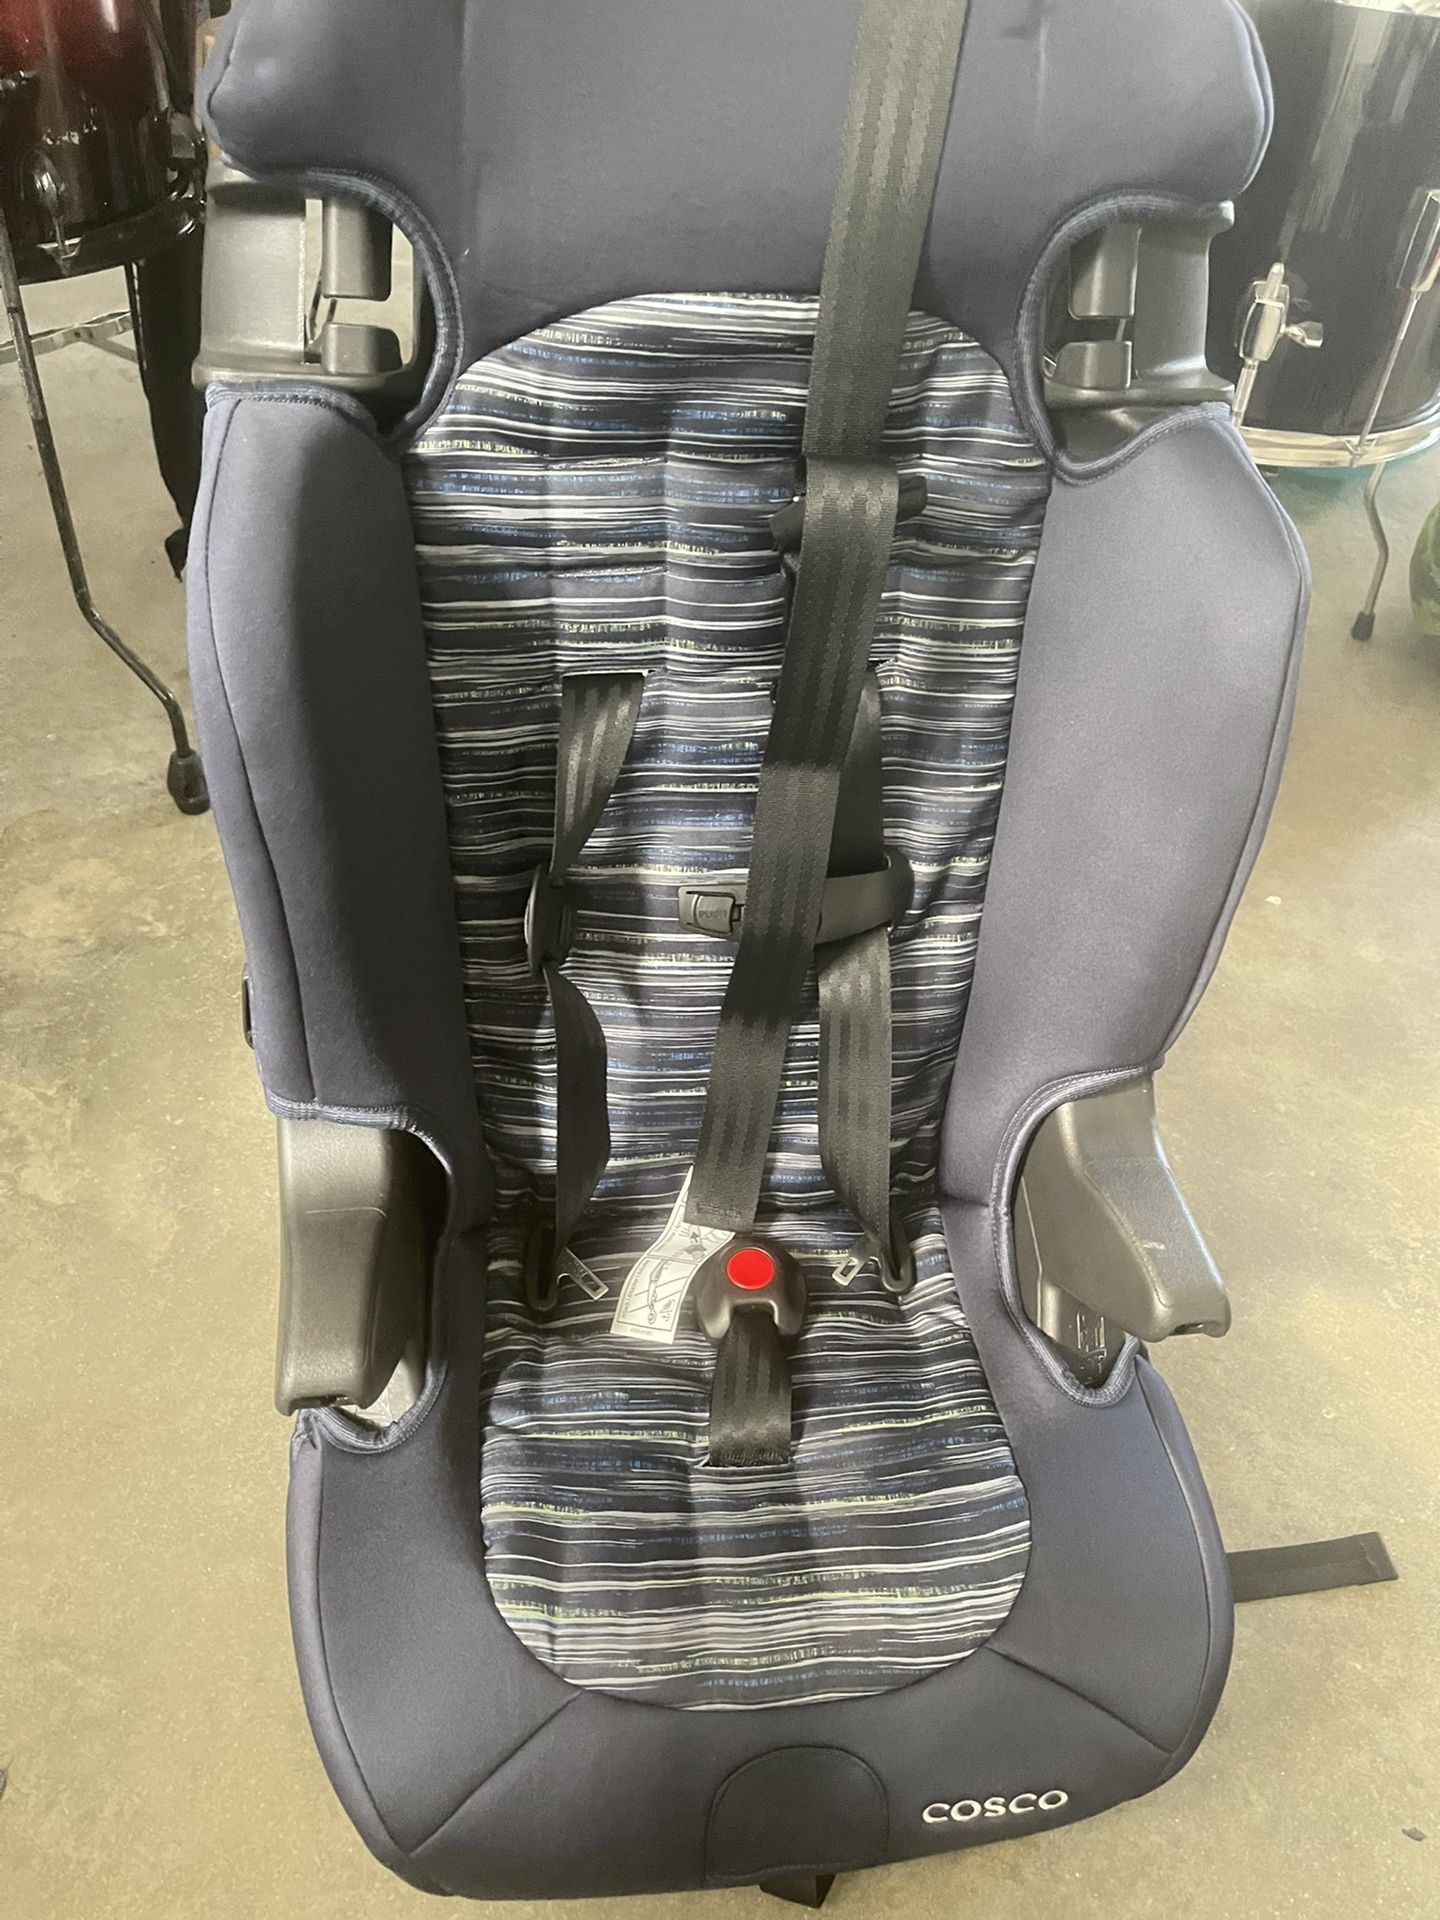 2 N 1 Car Seat Can Be Converted To A Booster Seat